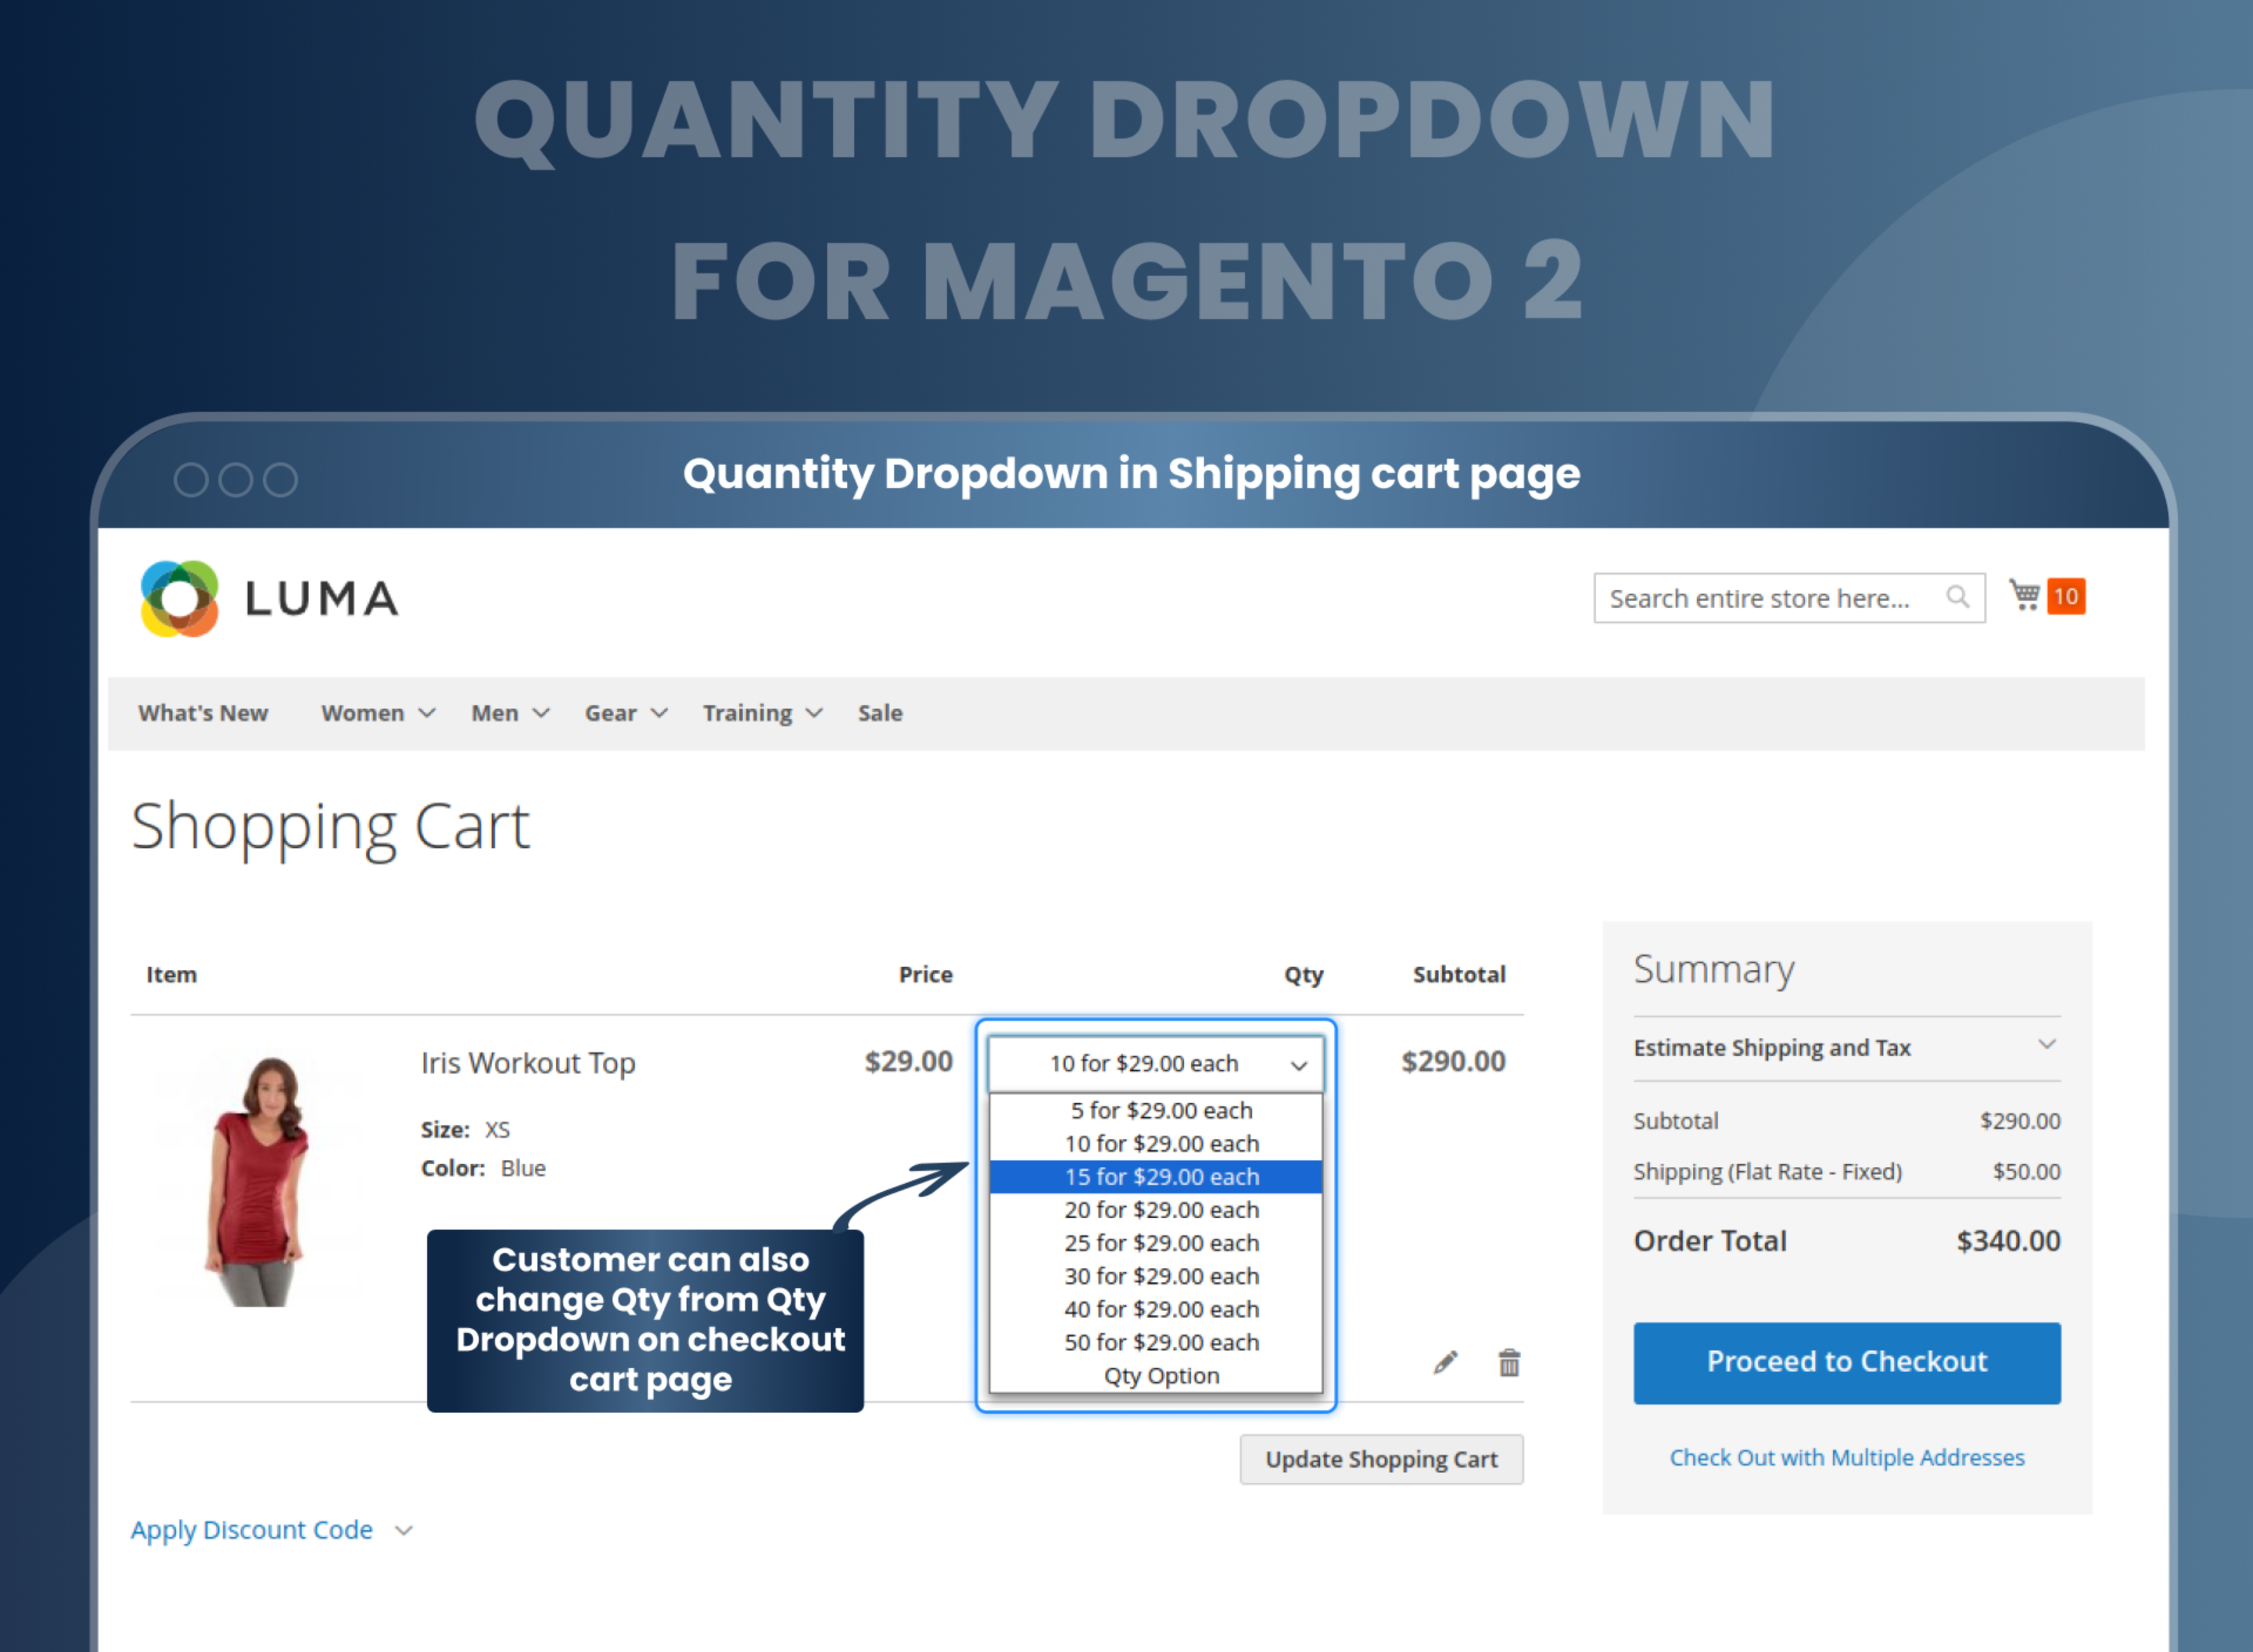 Quantity Dropdown in Shipping cart page